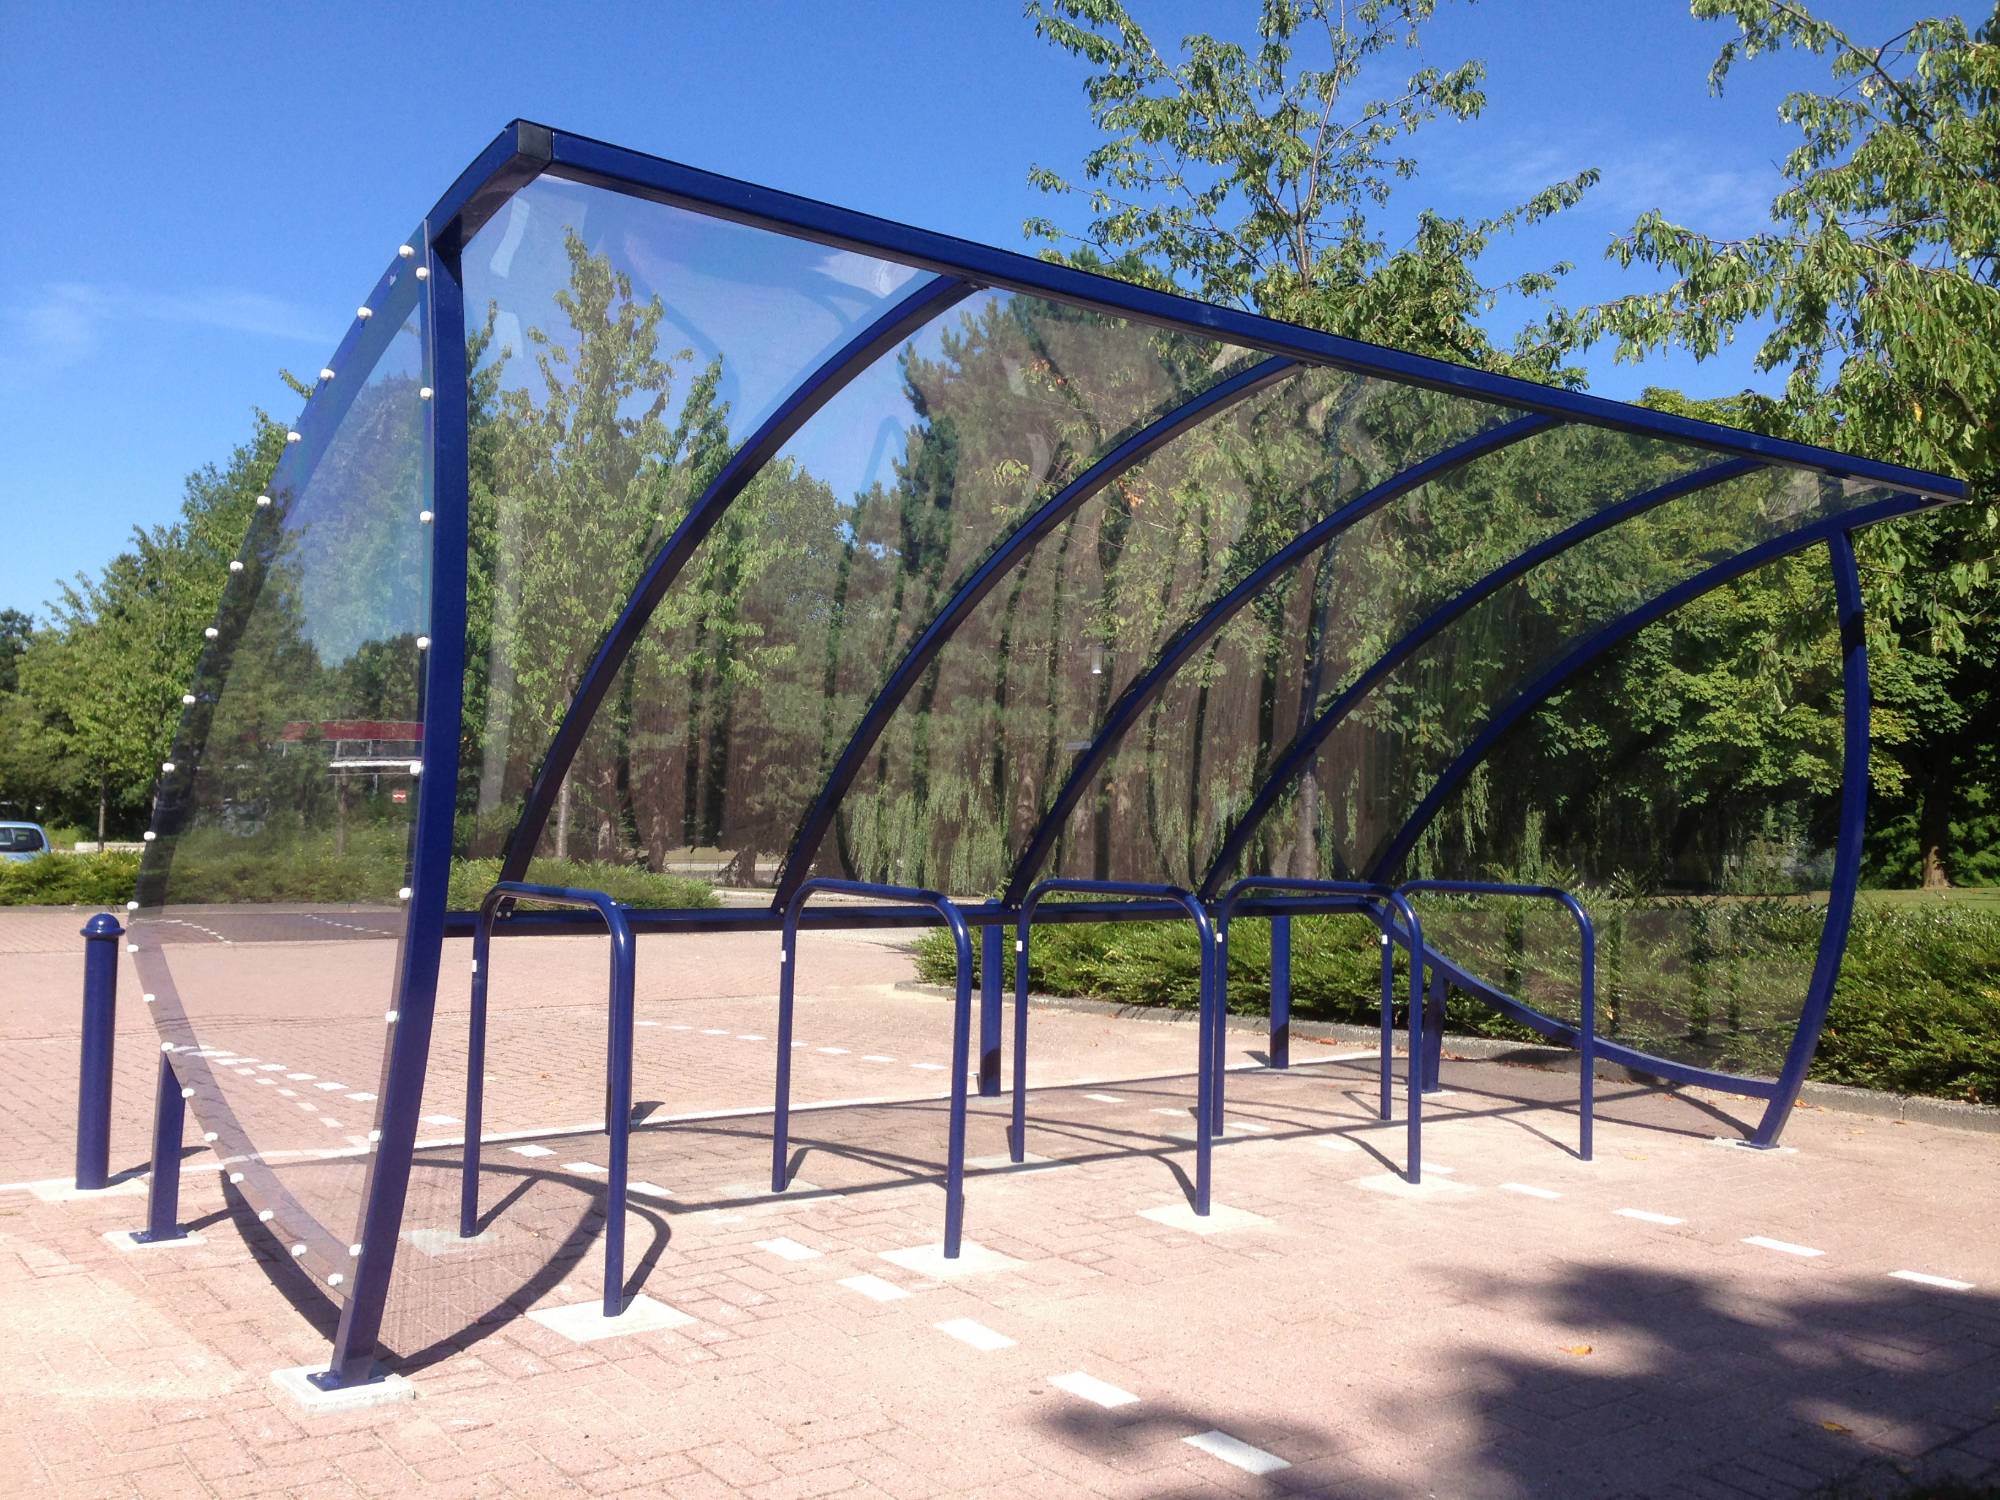 FalcoSail Bike Shelter - Open cycle shelter with sail design